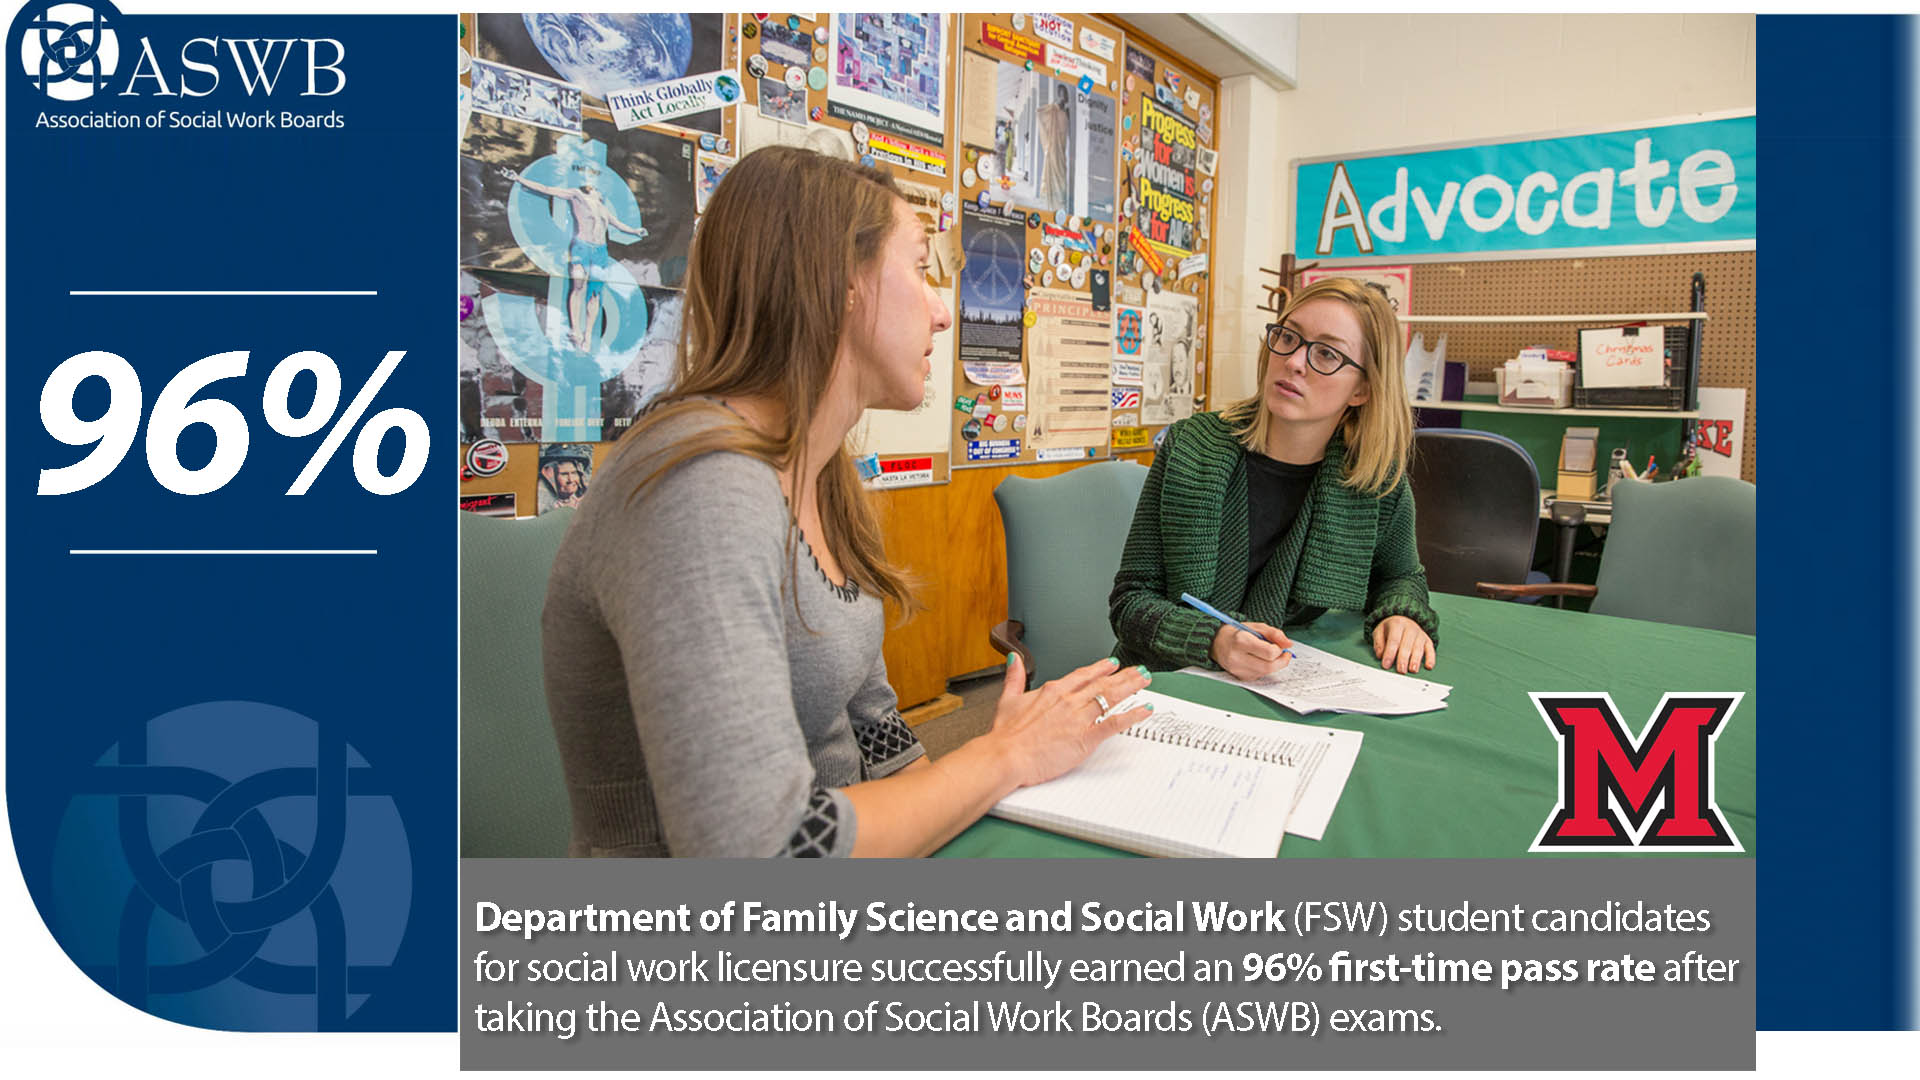 Department of Family Science and Social Work student candidates for social work licensure successfully earned a 96% first-time pass rate after taking the Association of Social Work Boards (ASWB) exams.